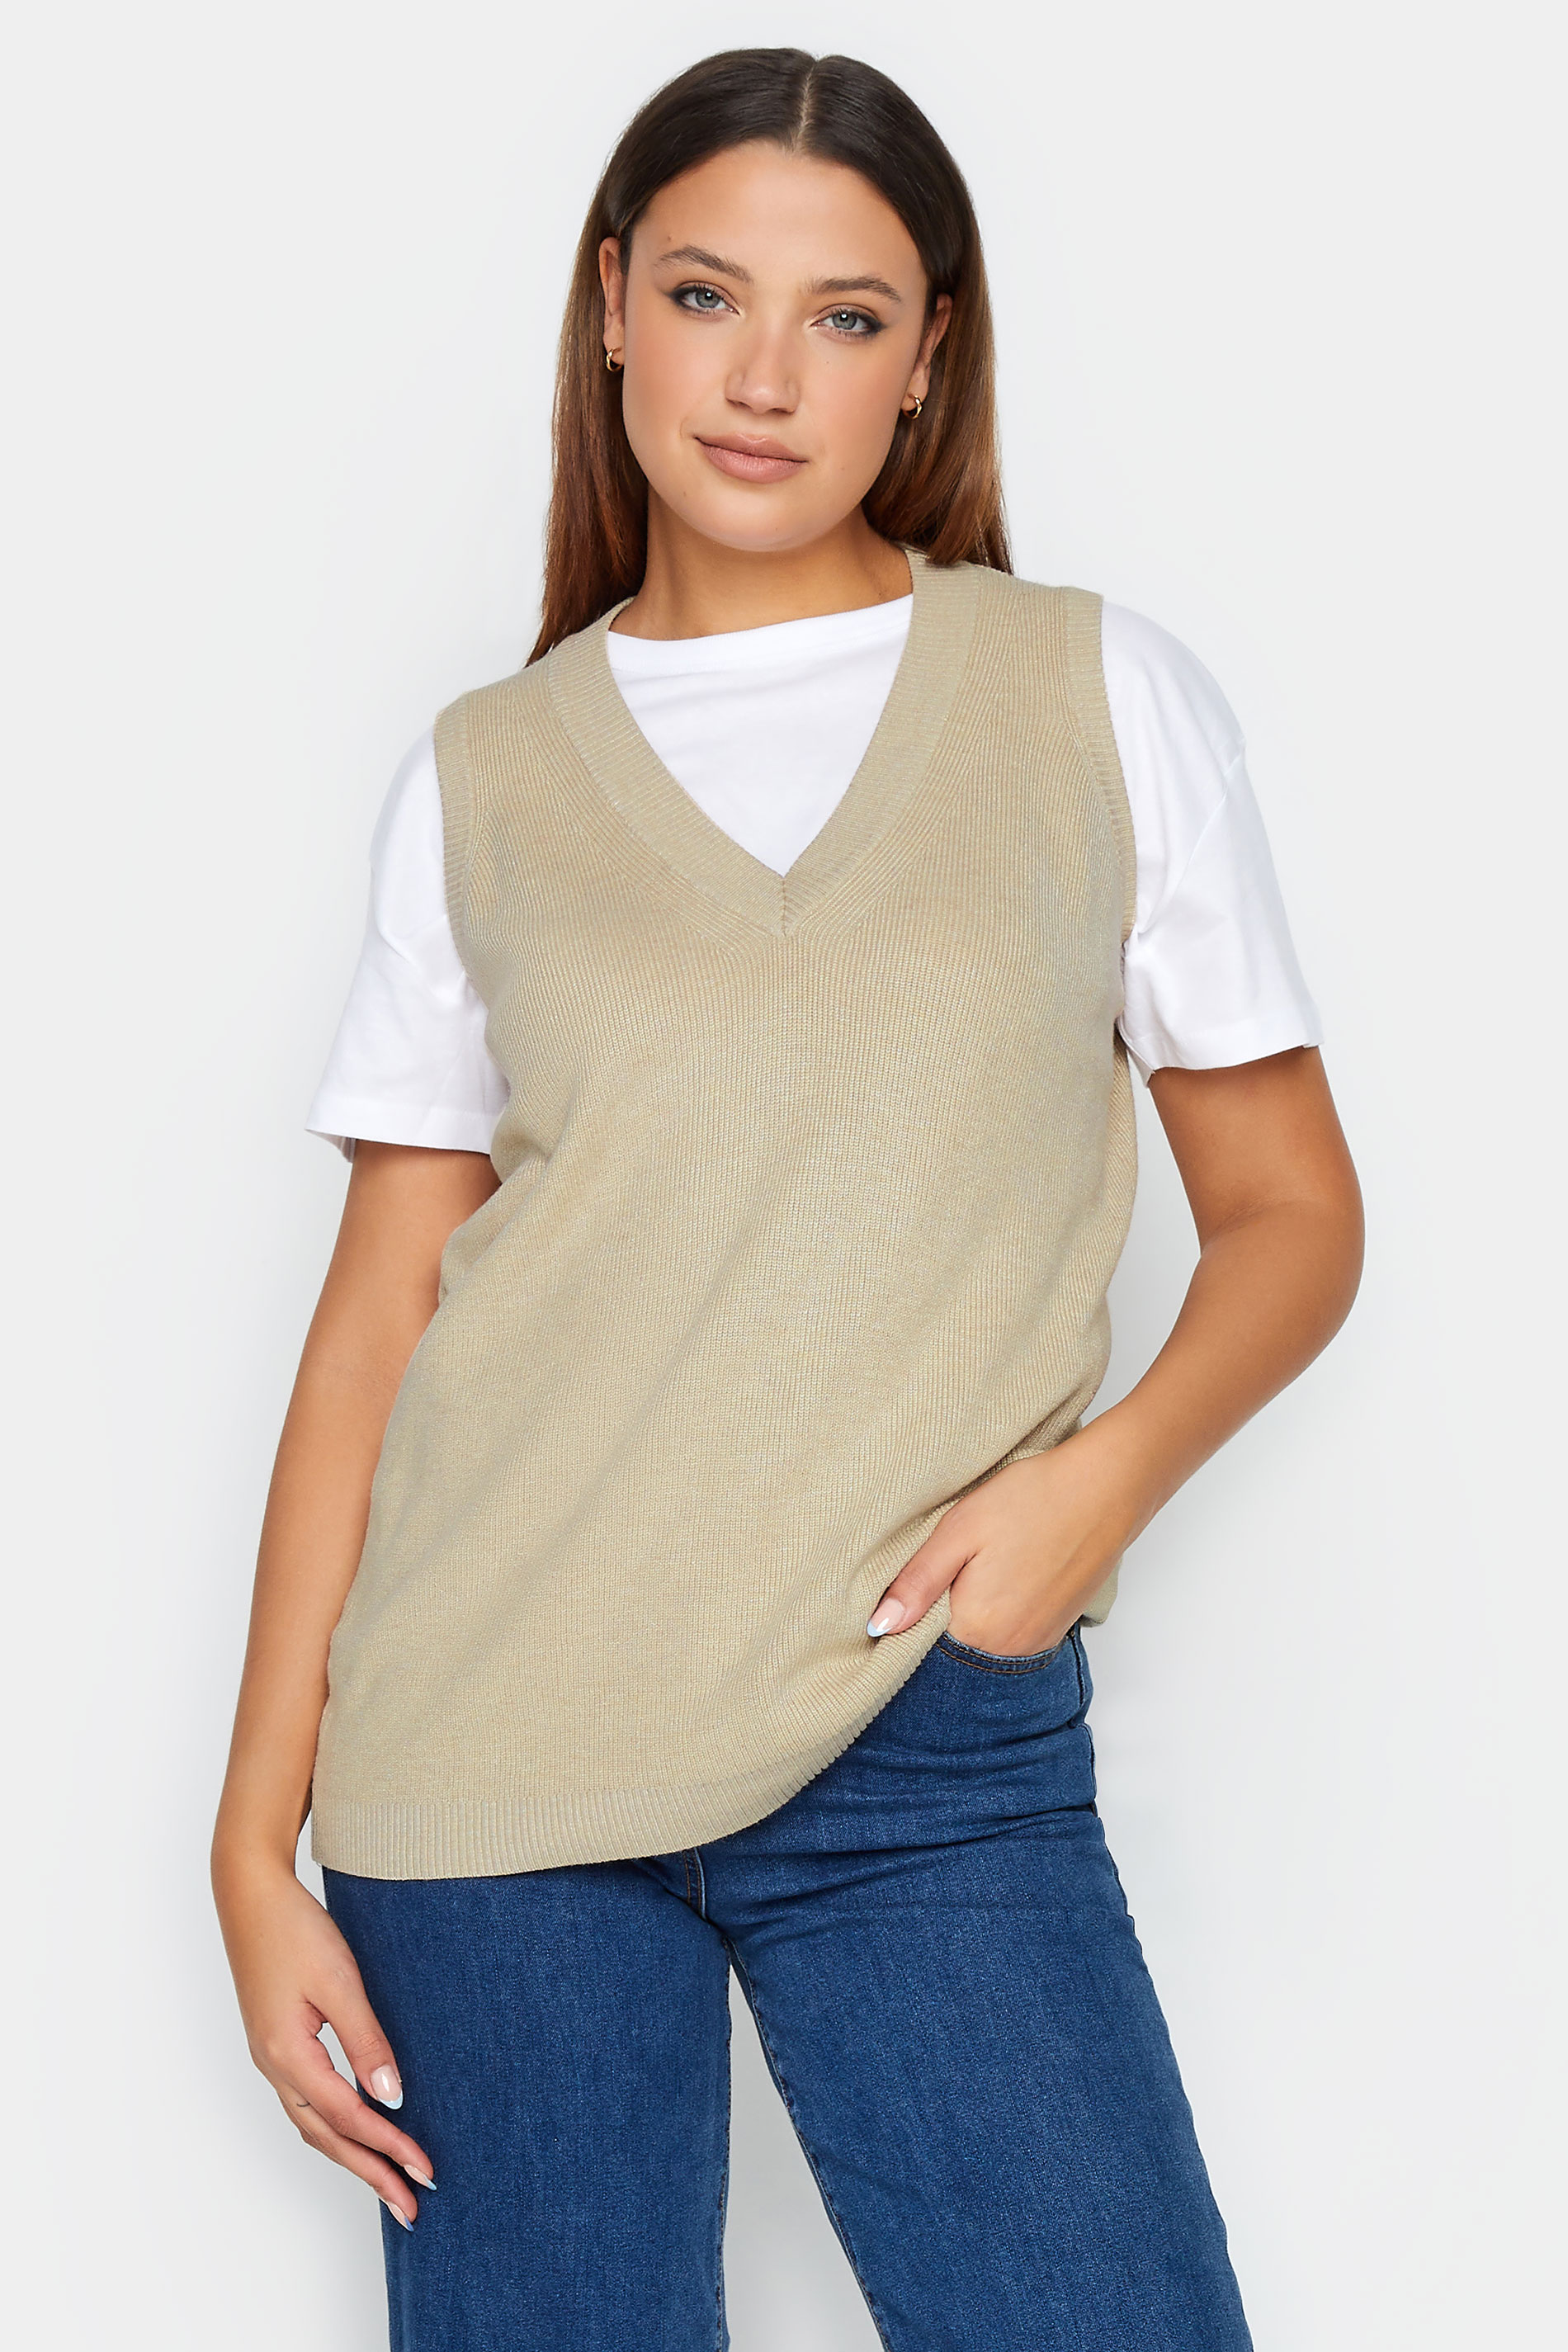 LTS Tall Women's Beige Brown V-Neck Knitted Vest Top | Long Tall Sally 1